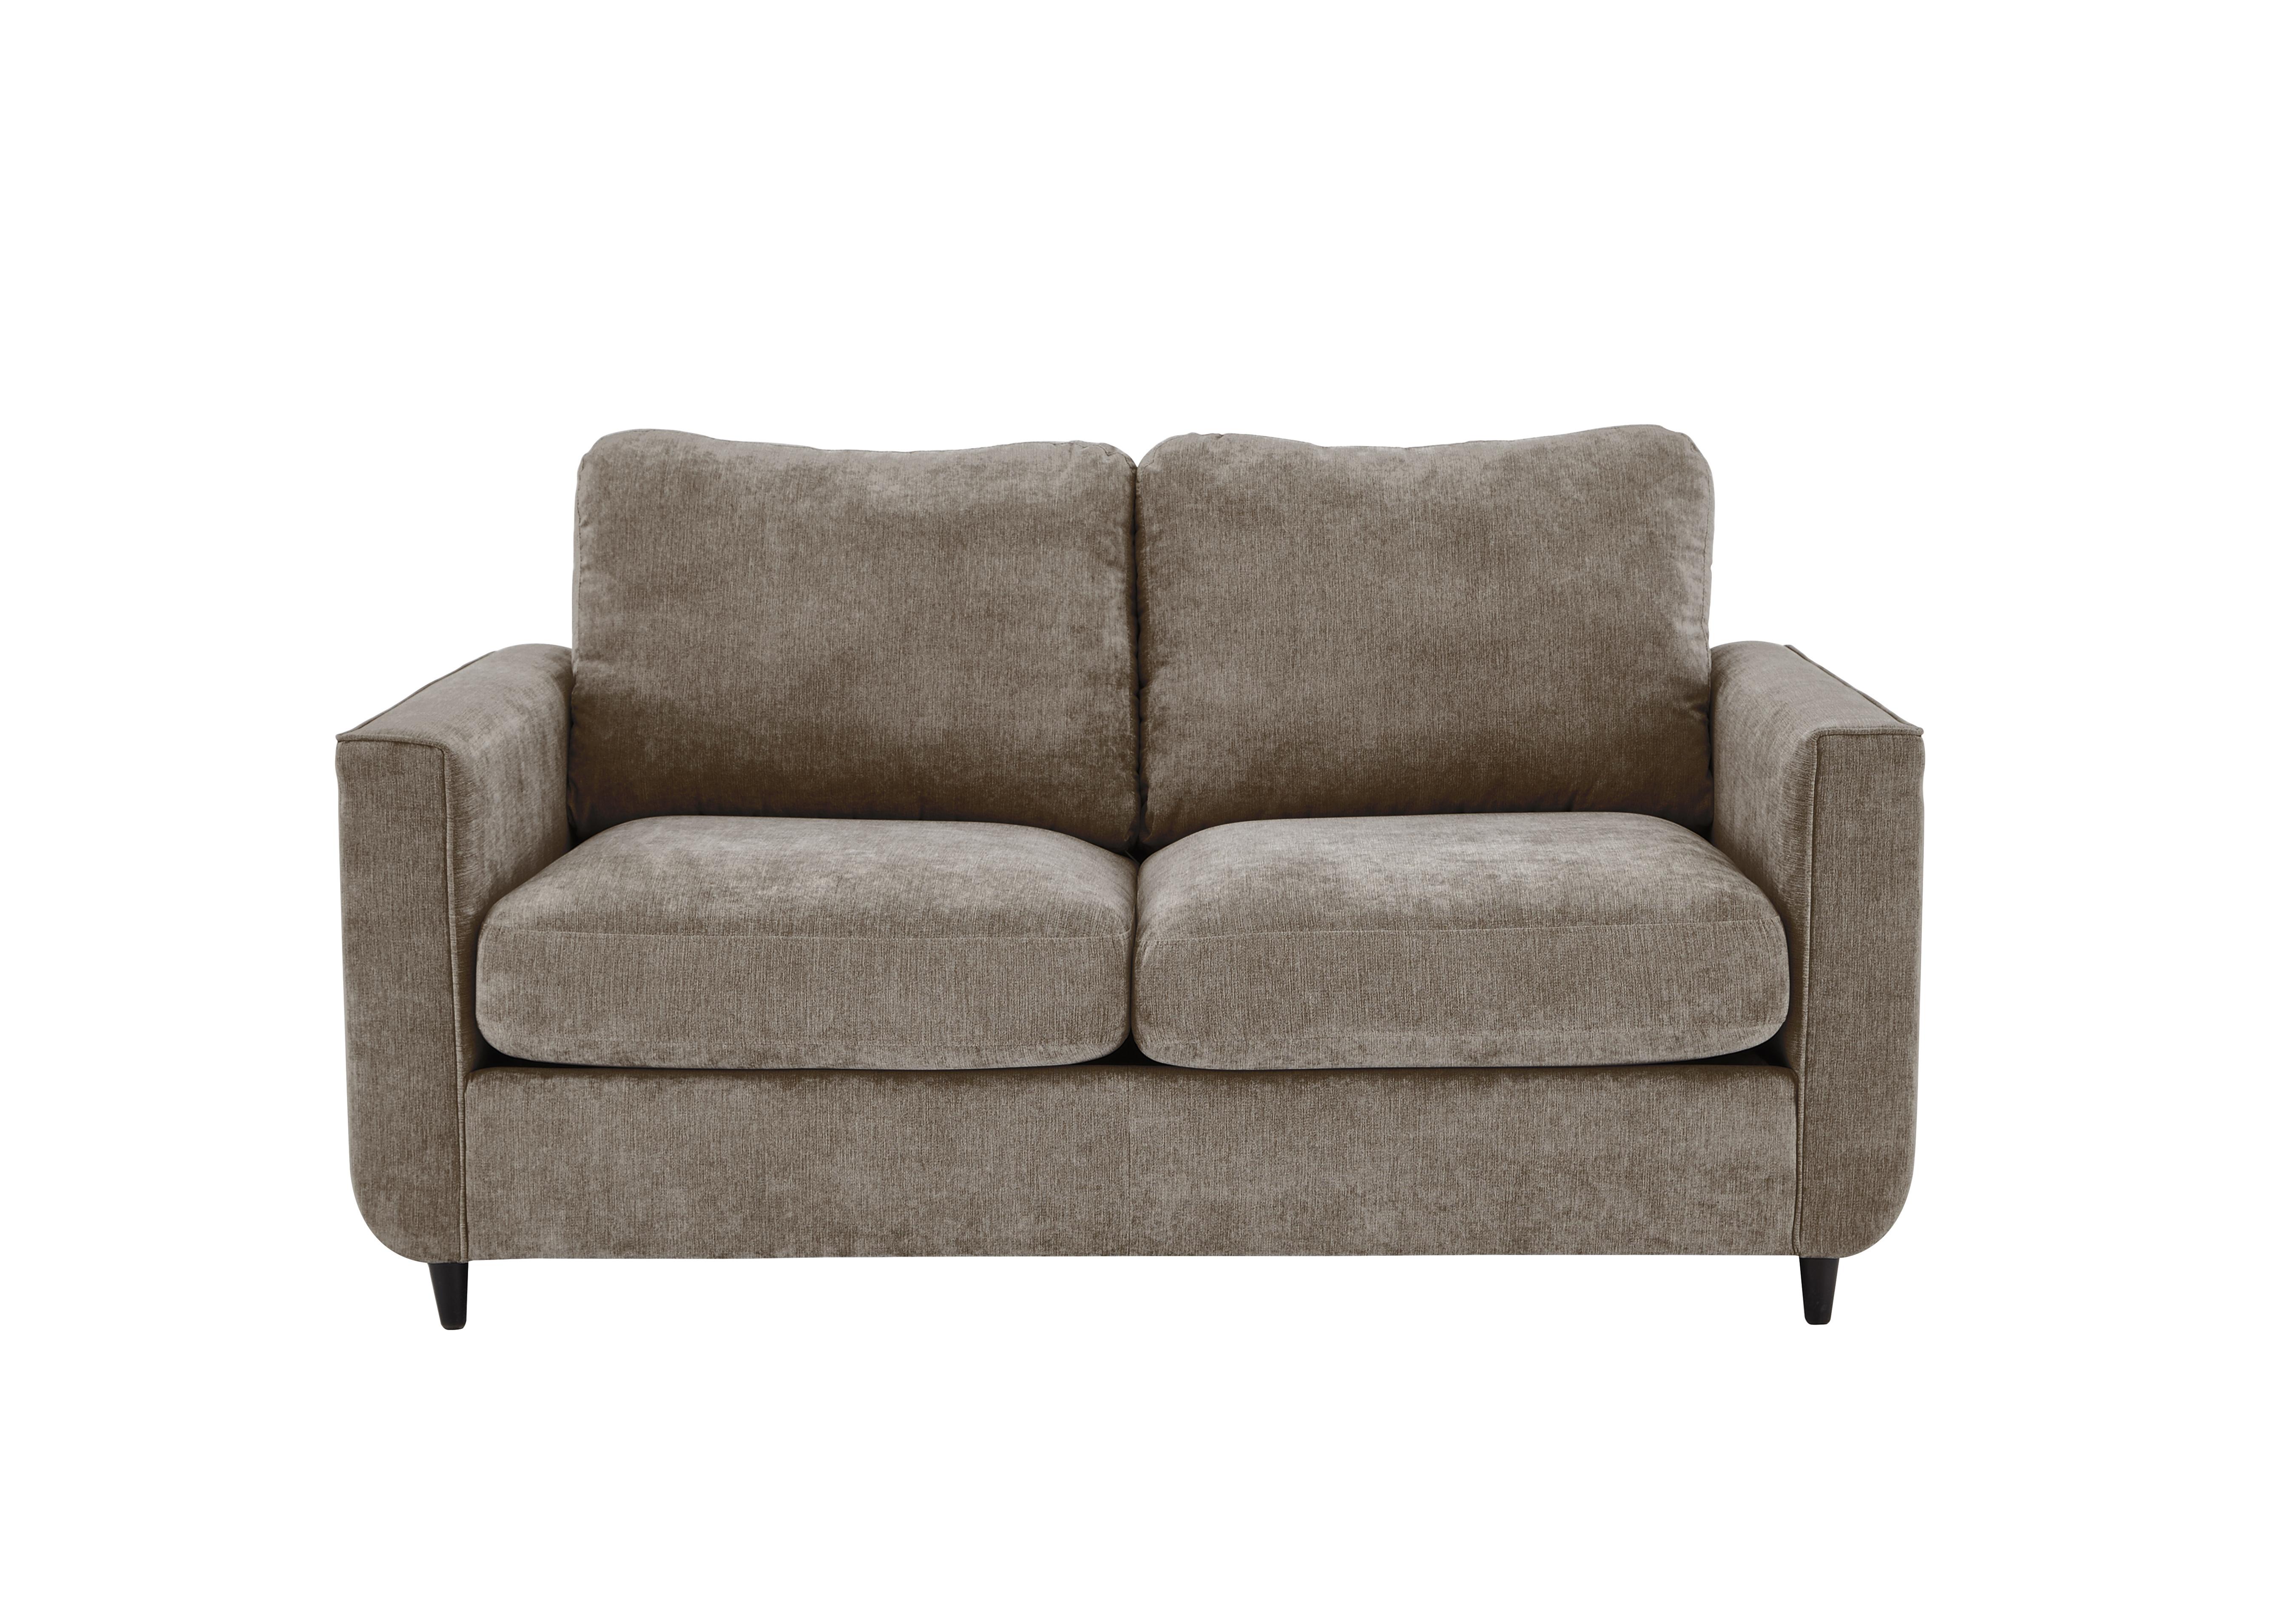 Esprit 2 Seater Fabric Sofa Bed in Taupe Ebony Feet on Furniture Village